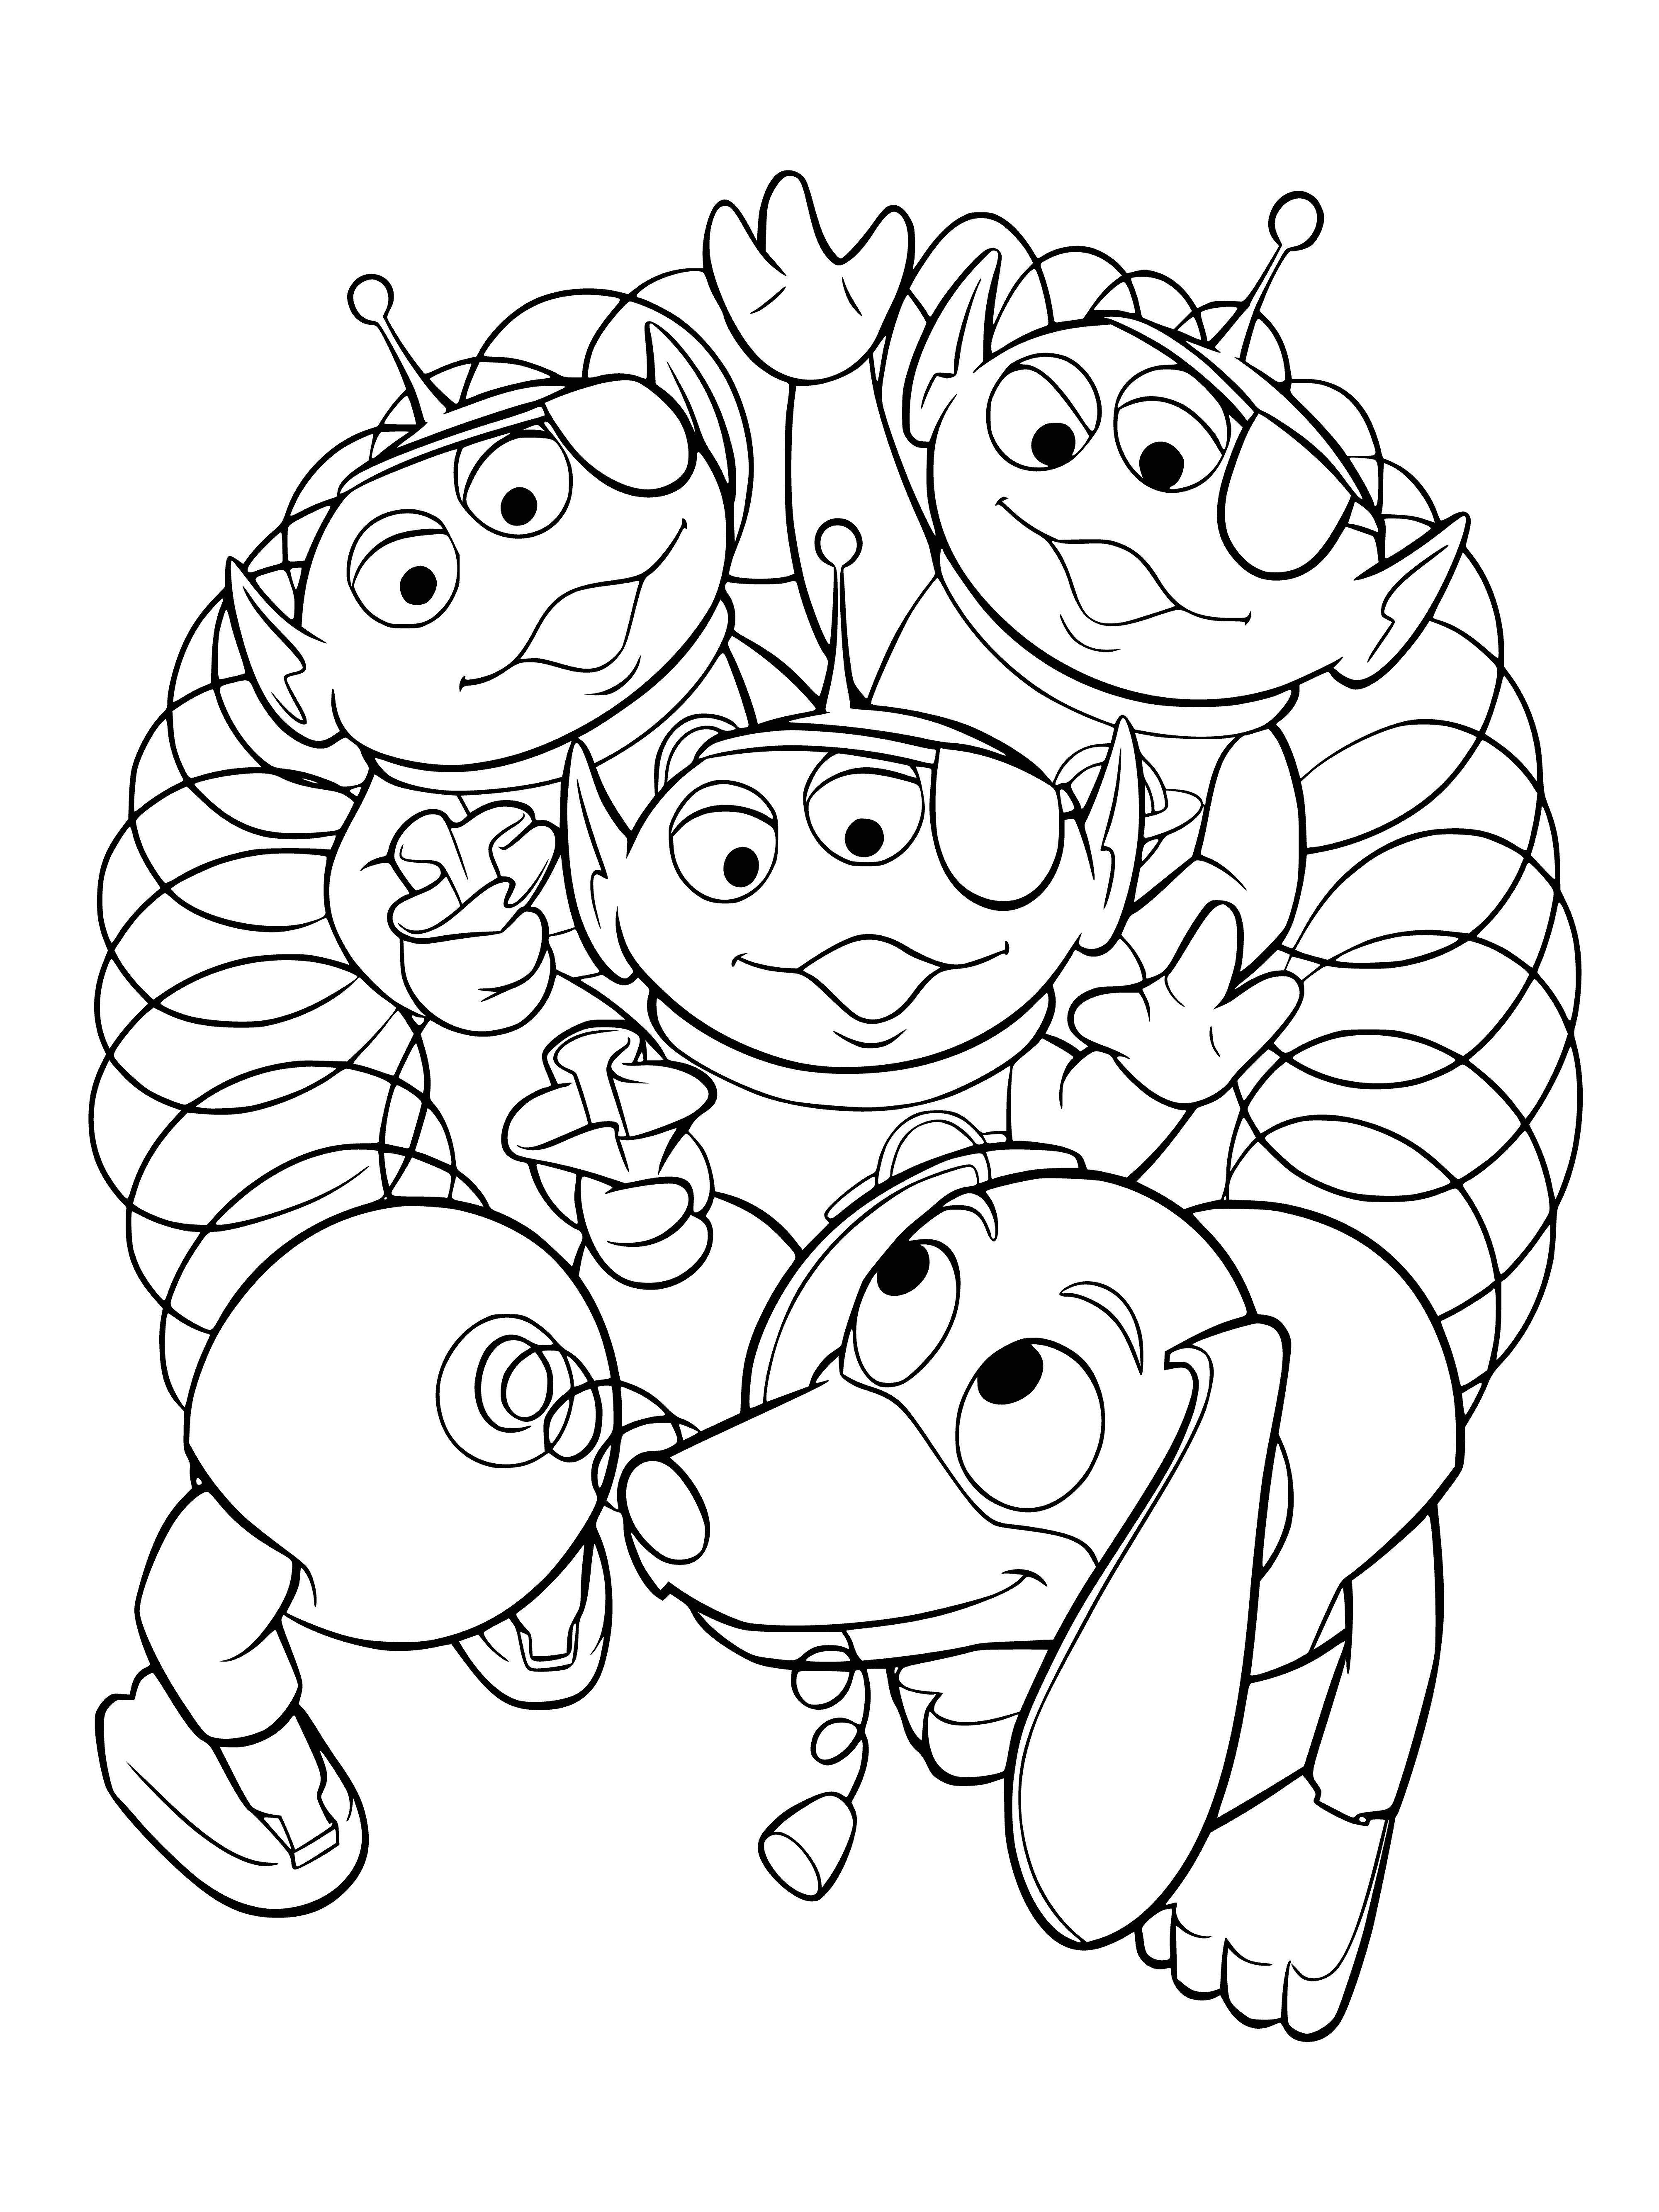 Spiral Dog and Aliens coloring page